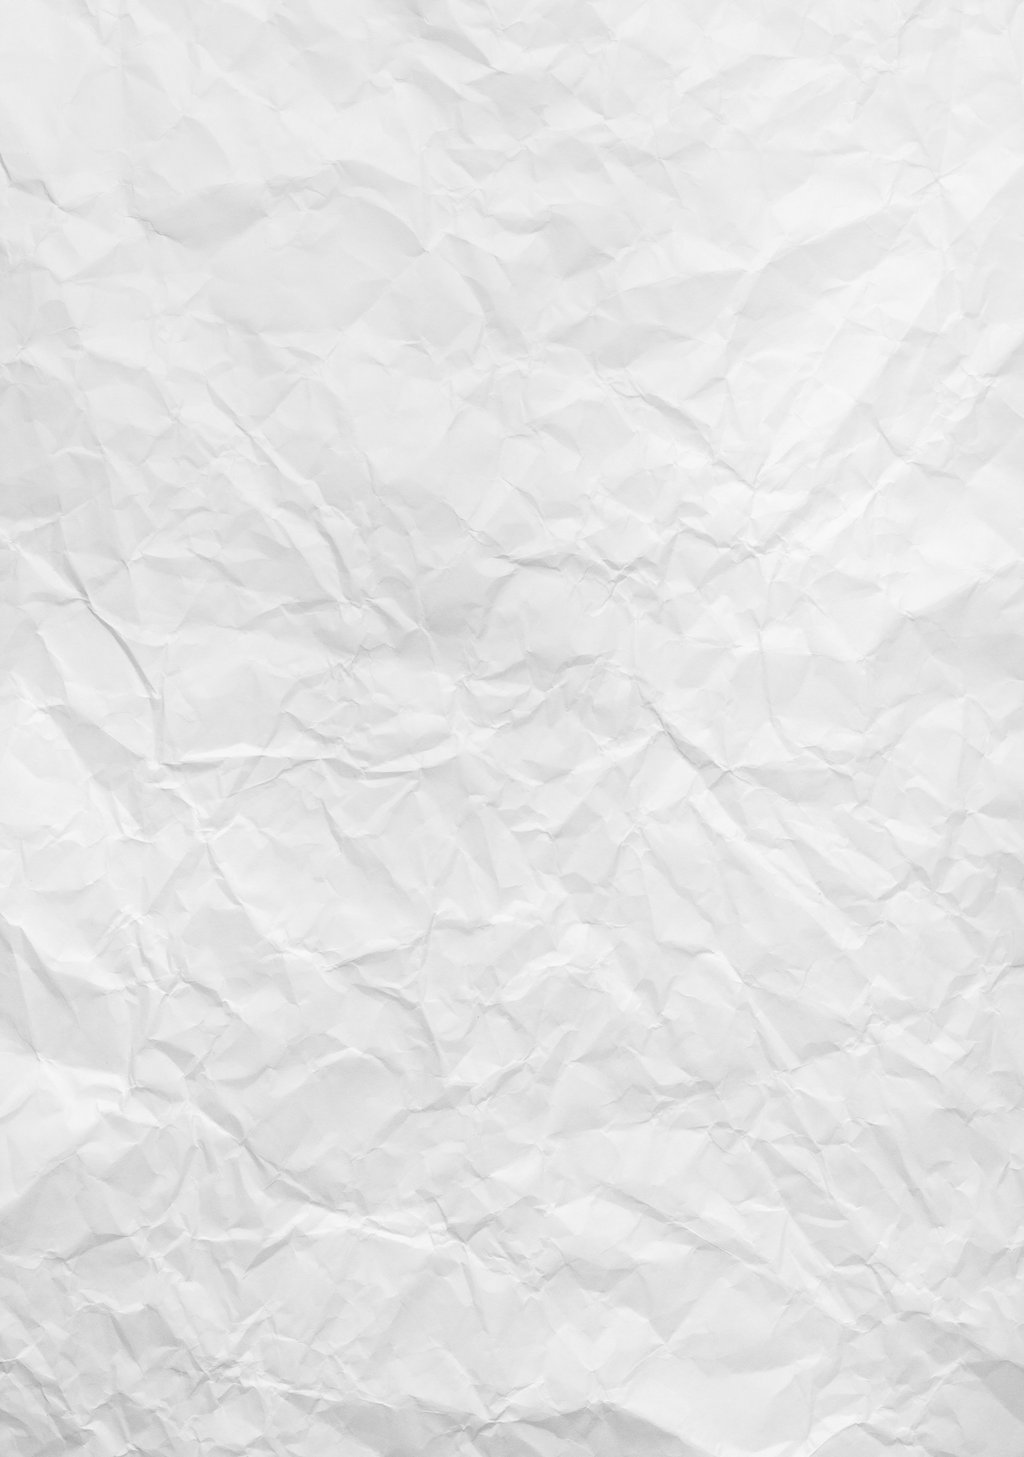 paper_texture_by_evusha-d68dvv6